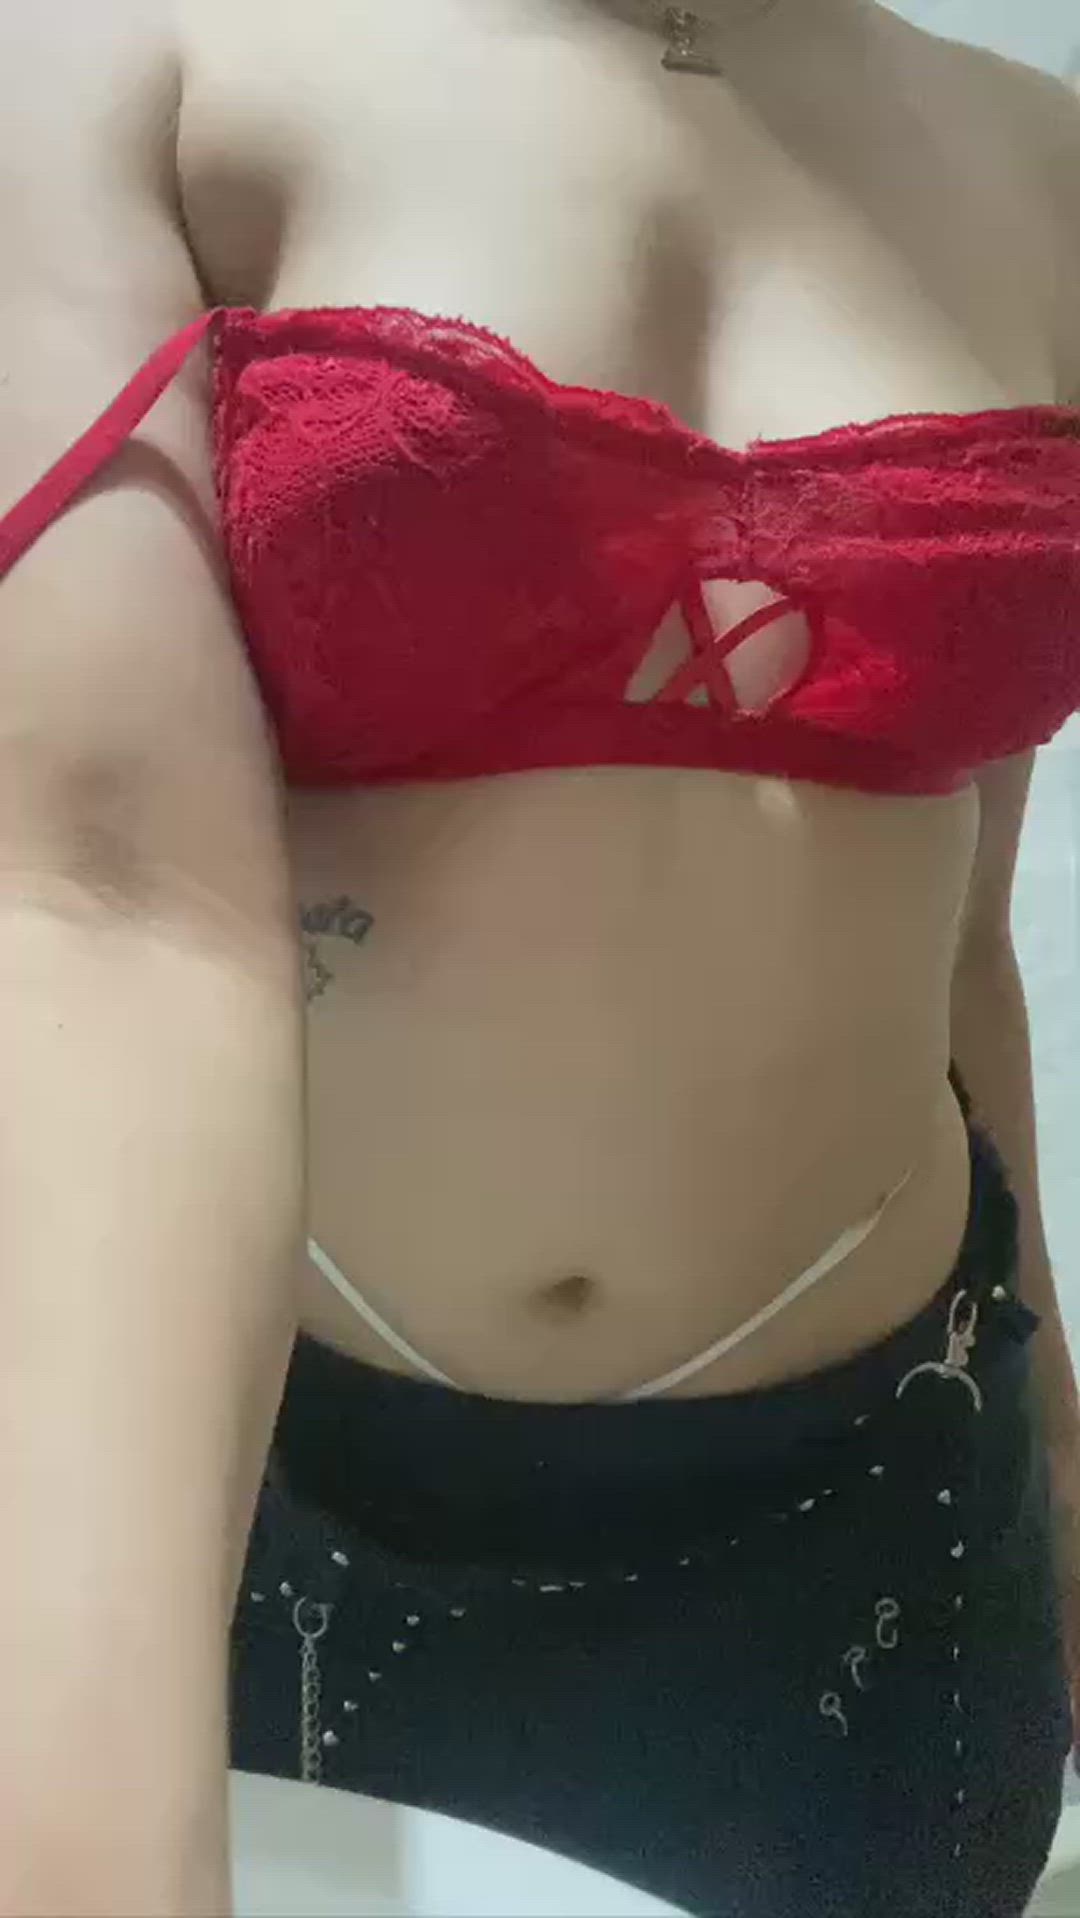 Amateur porn video with onlyfans model yourdreamgirlx <strong>@your_dreamgirlx</strong>